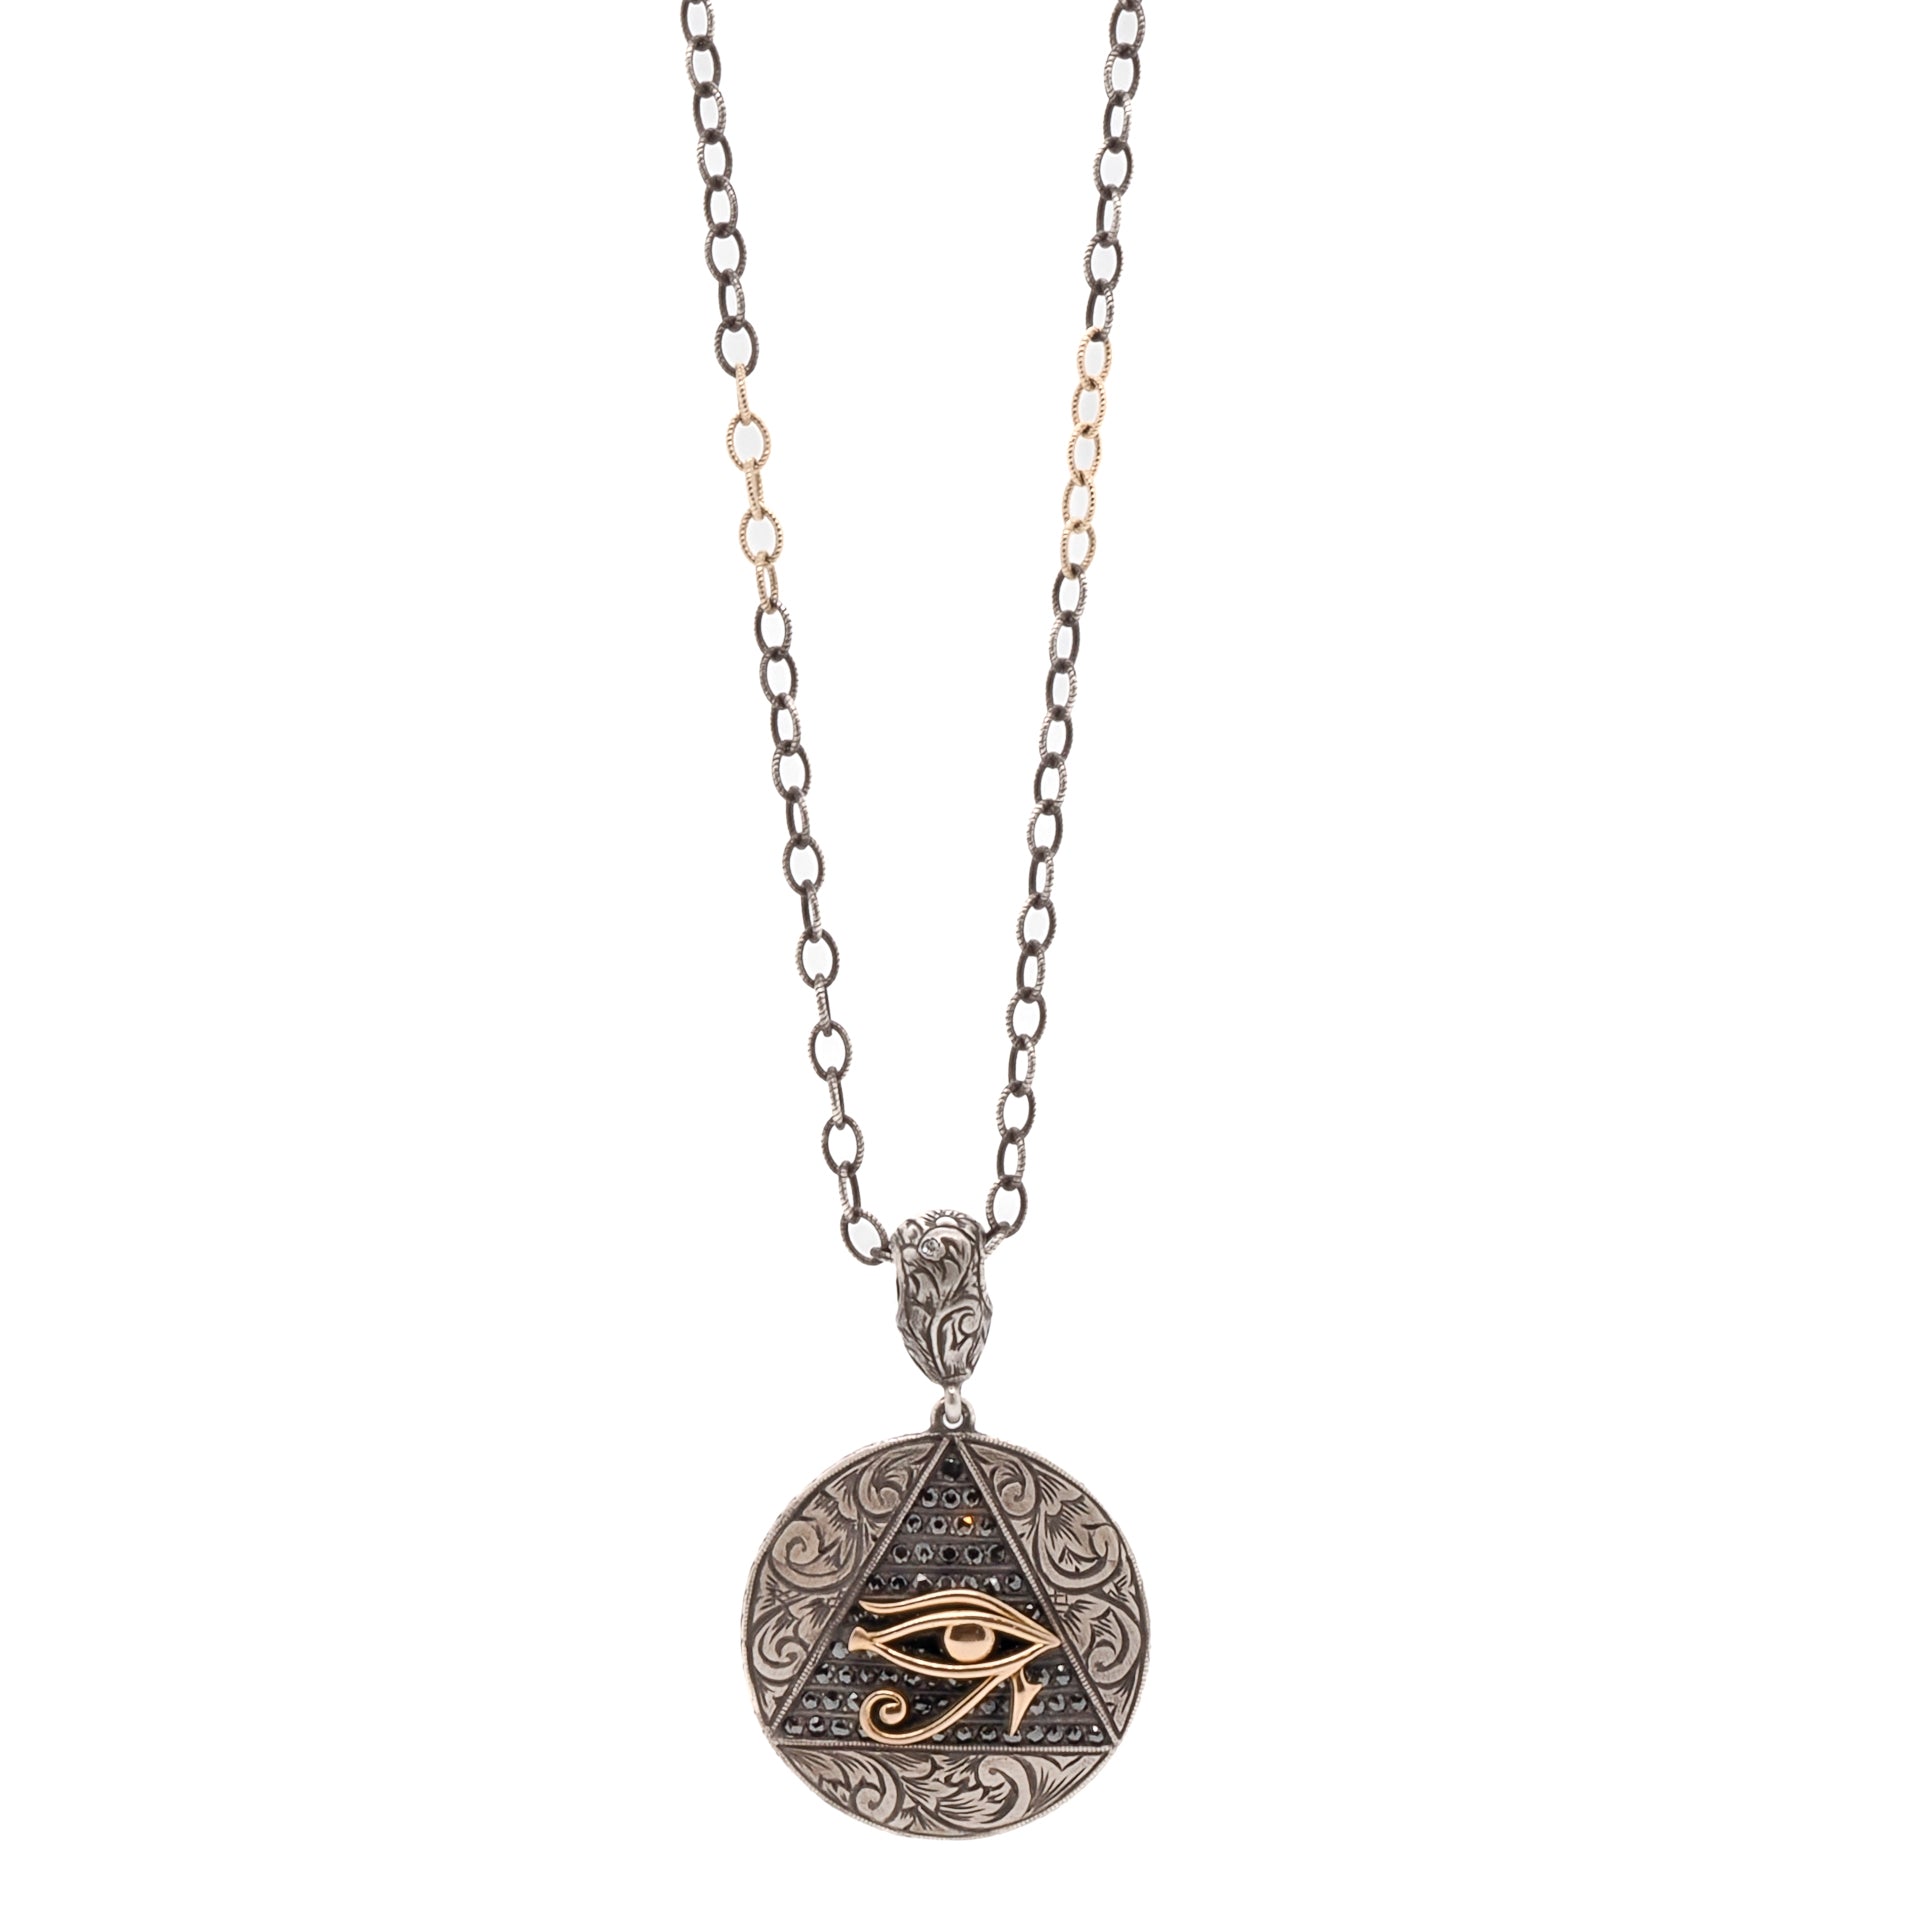 Egyptian Eye of Ra Necklace - A Beautiful and Meaningful Piece of Handcrafted Jewelry